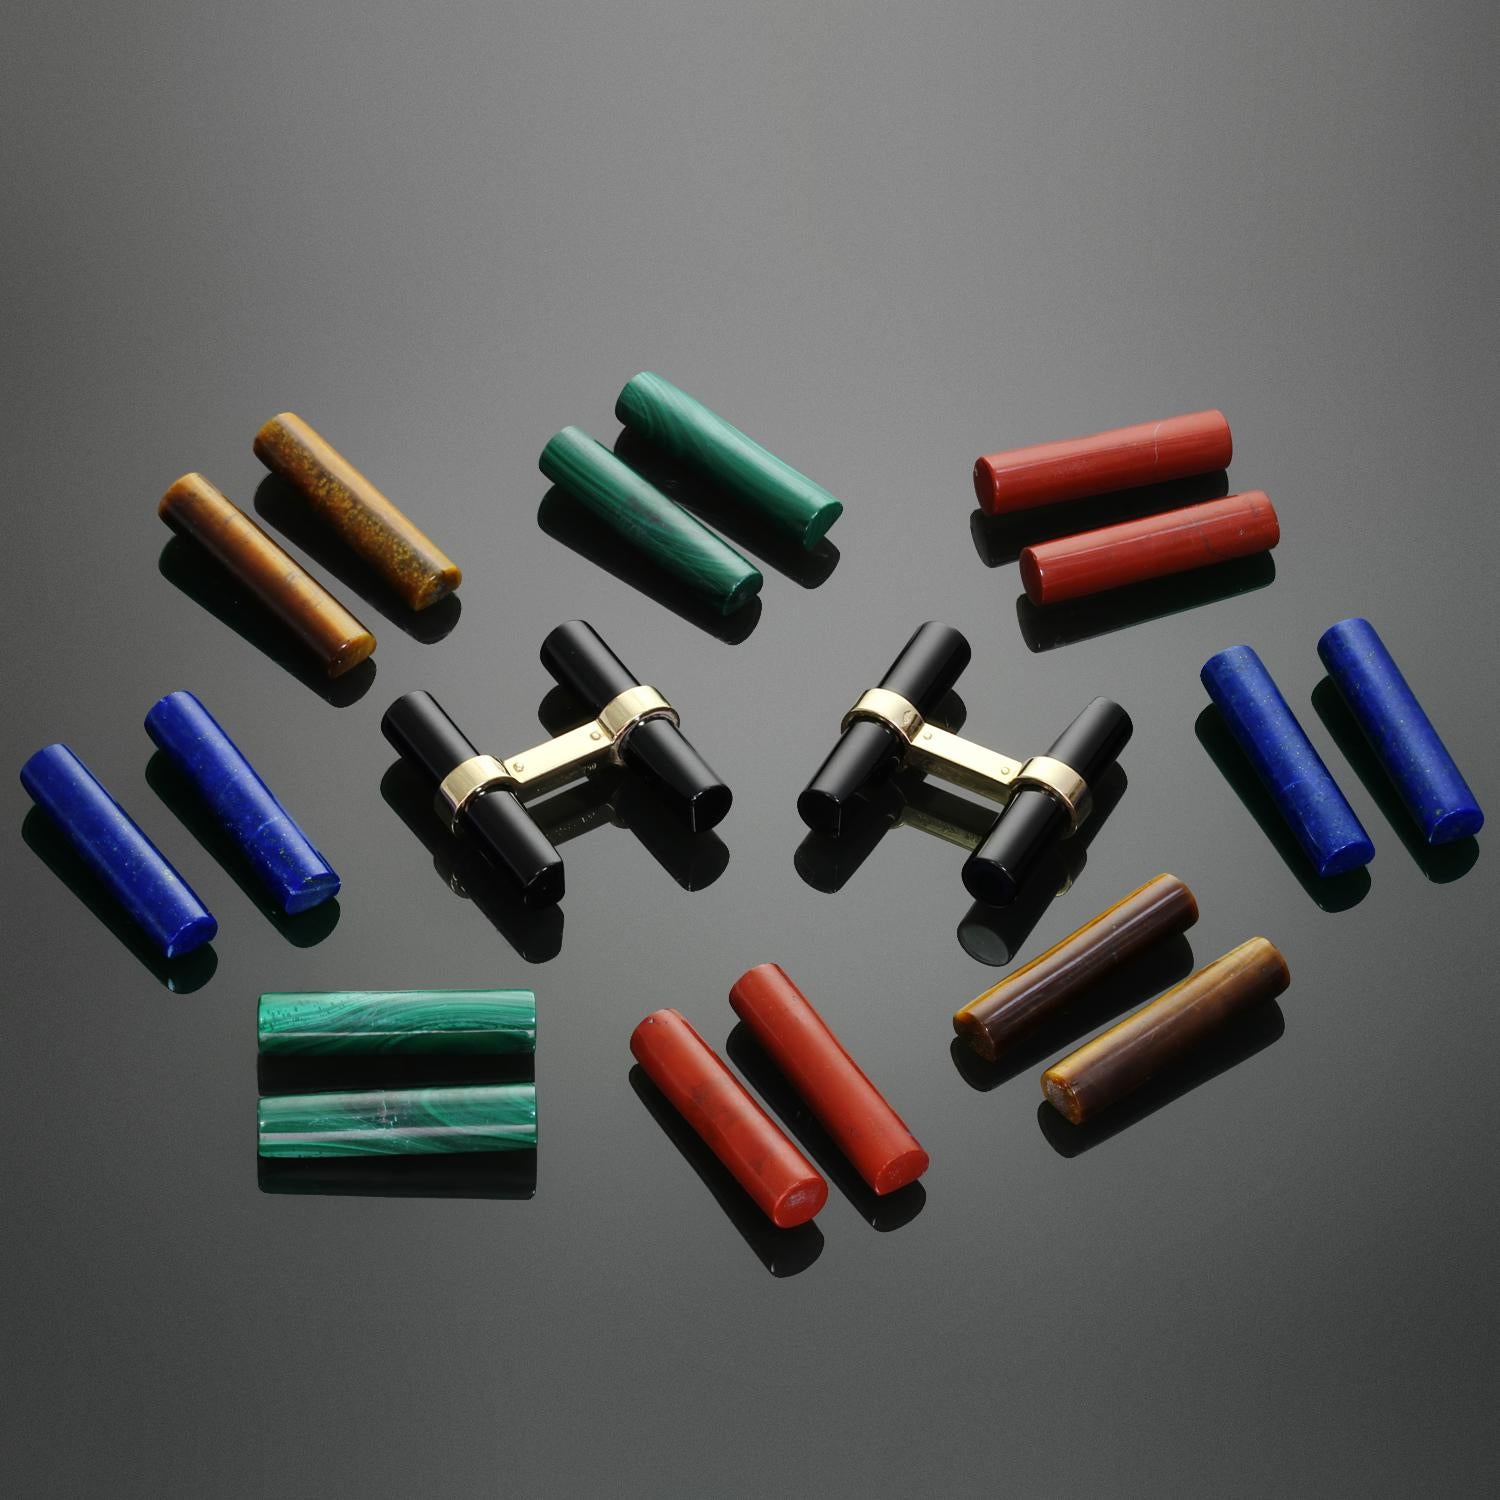 This exquisite and rare vintage Cartier bar cufflinks set is crafted in 18k yellow gold and comes with 5 sets of interchangeable batons composed of Black Onyx, Lapis Lazuli, Tiger's Eye, Jasper, and Malachite. Made in France Measurements: 0.86